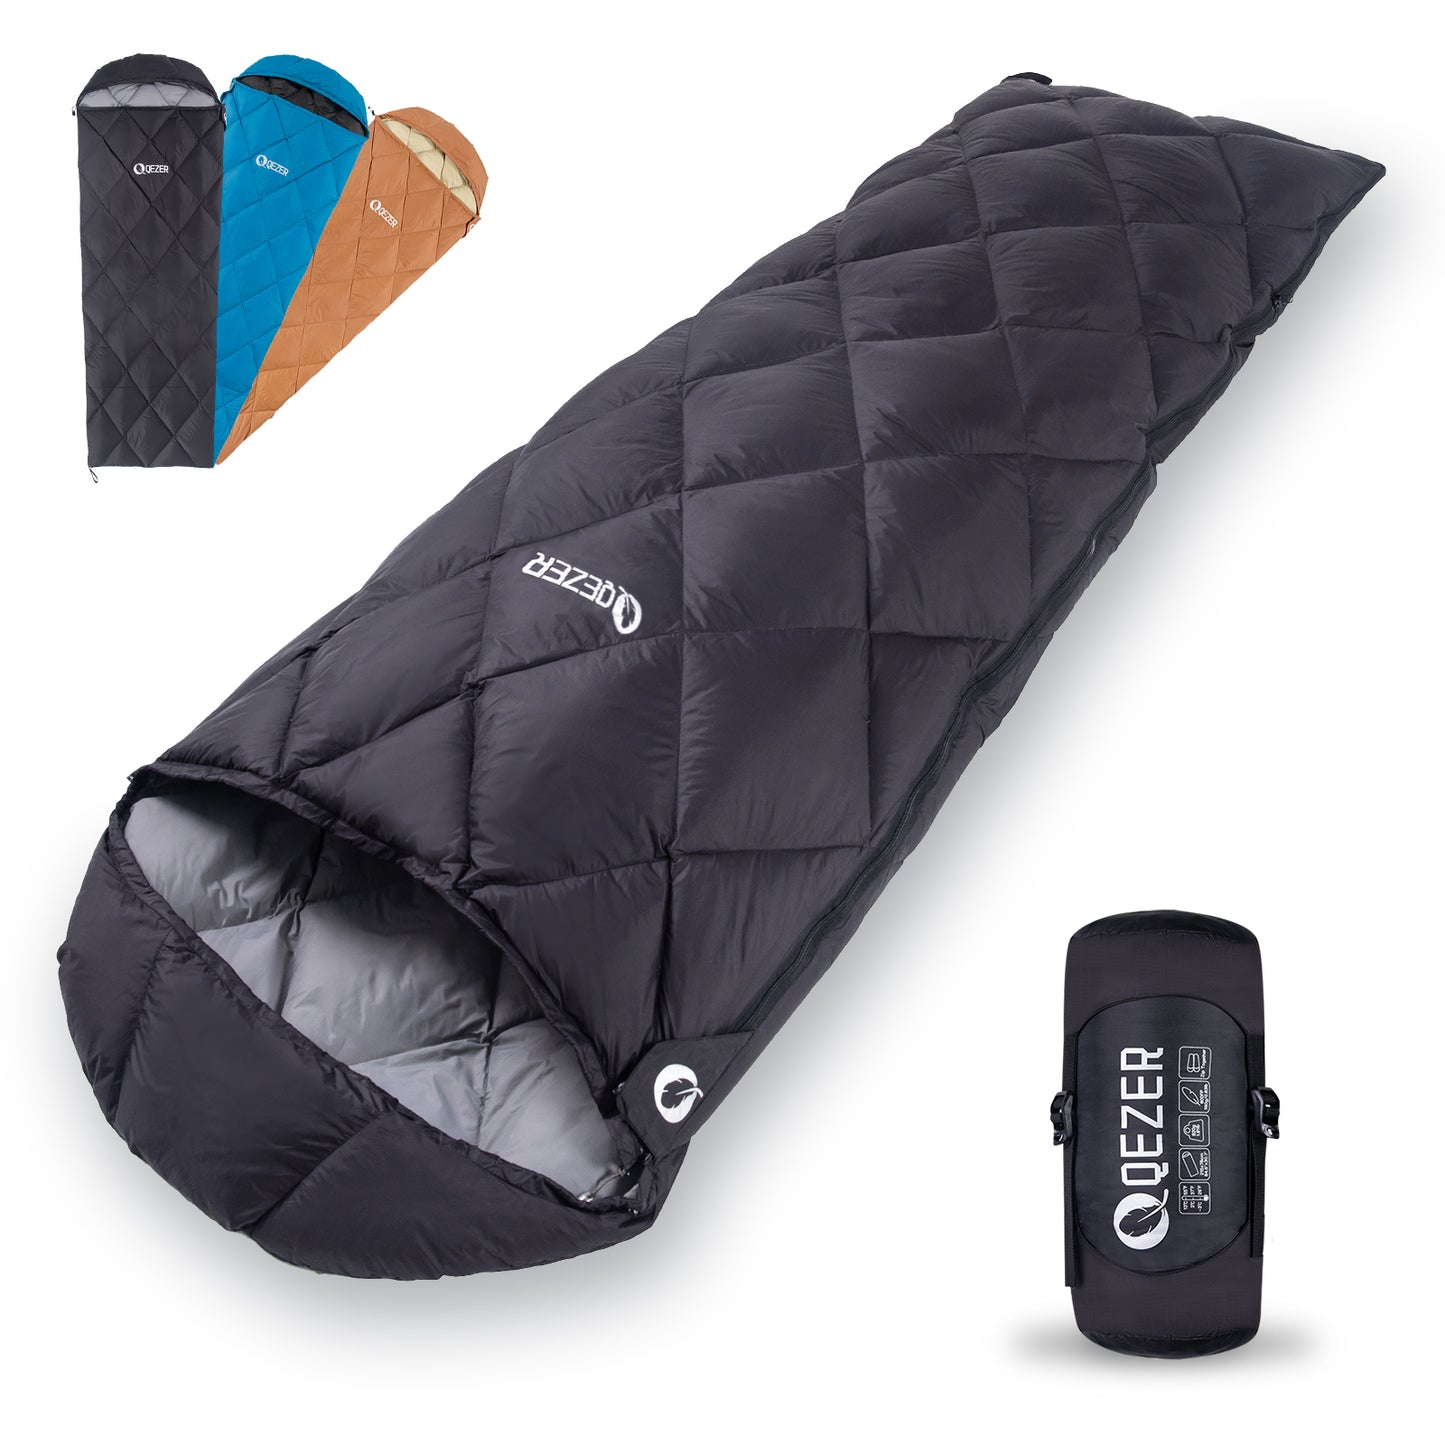 QEZER(380g) Down Sleeping Bag for Adults 40-60℉(5°C~15°C) Duck Down for Camping,Hiking and Backpacking